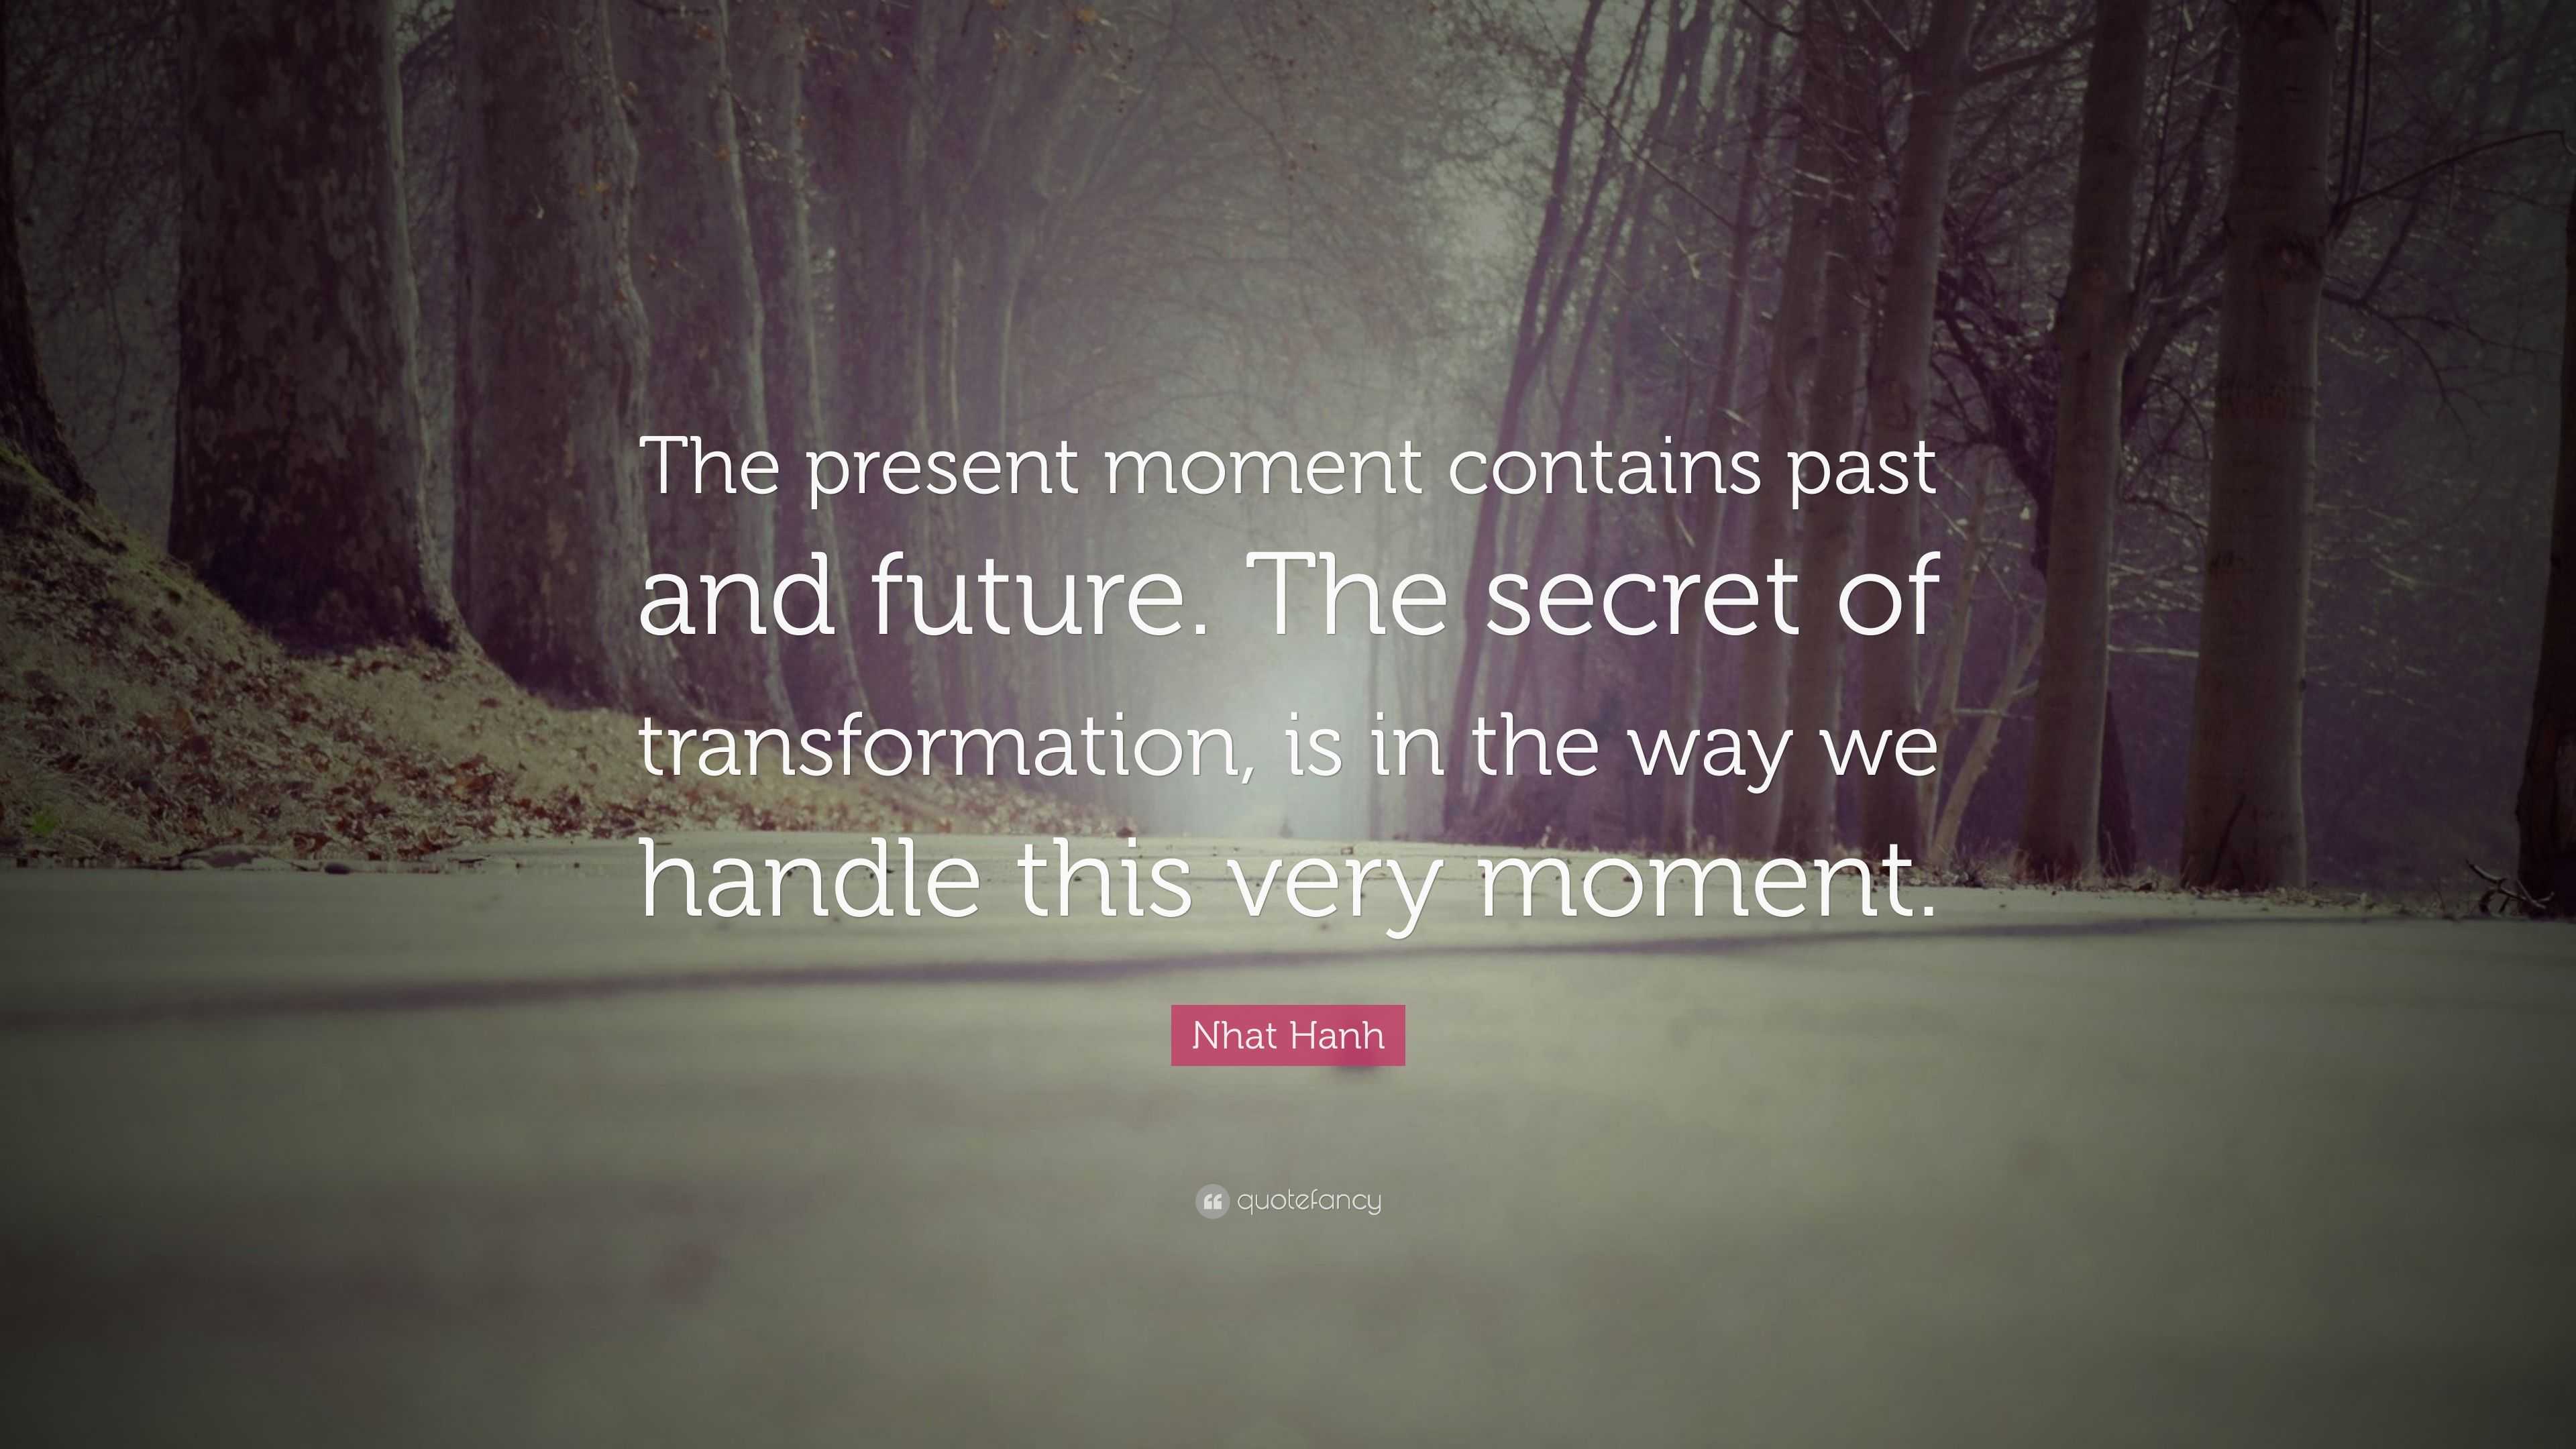 Nhat Hanh Quote: “The present moment contains past and future. The ...